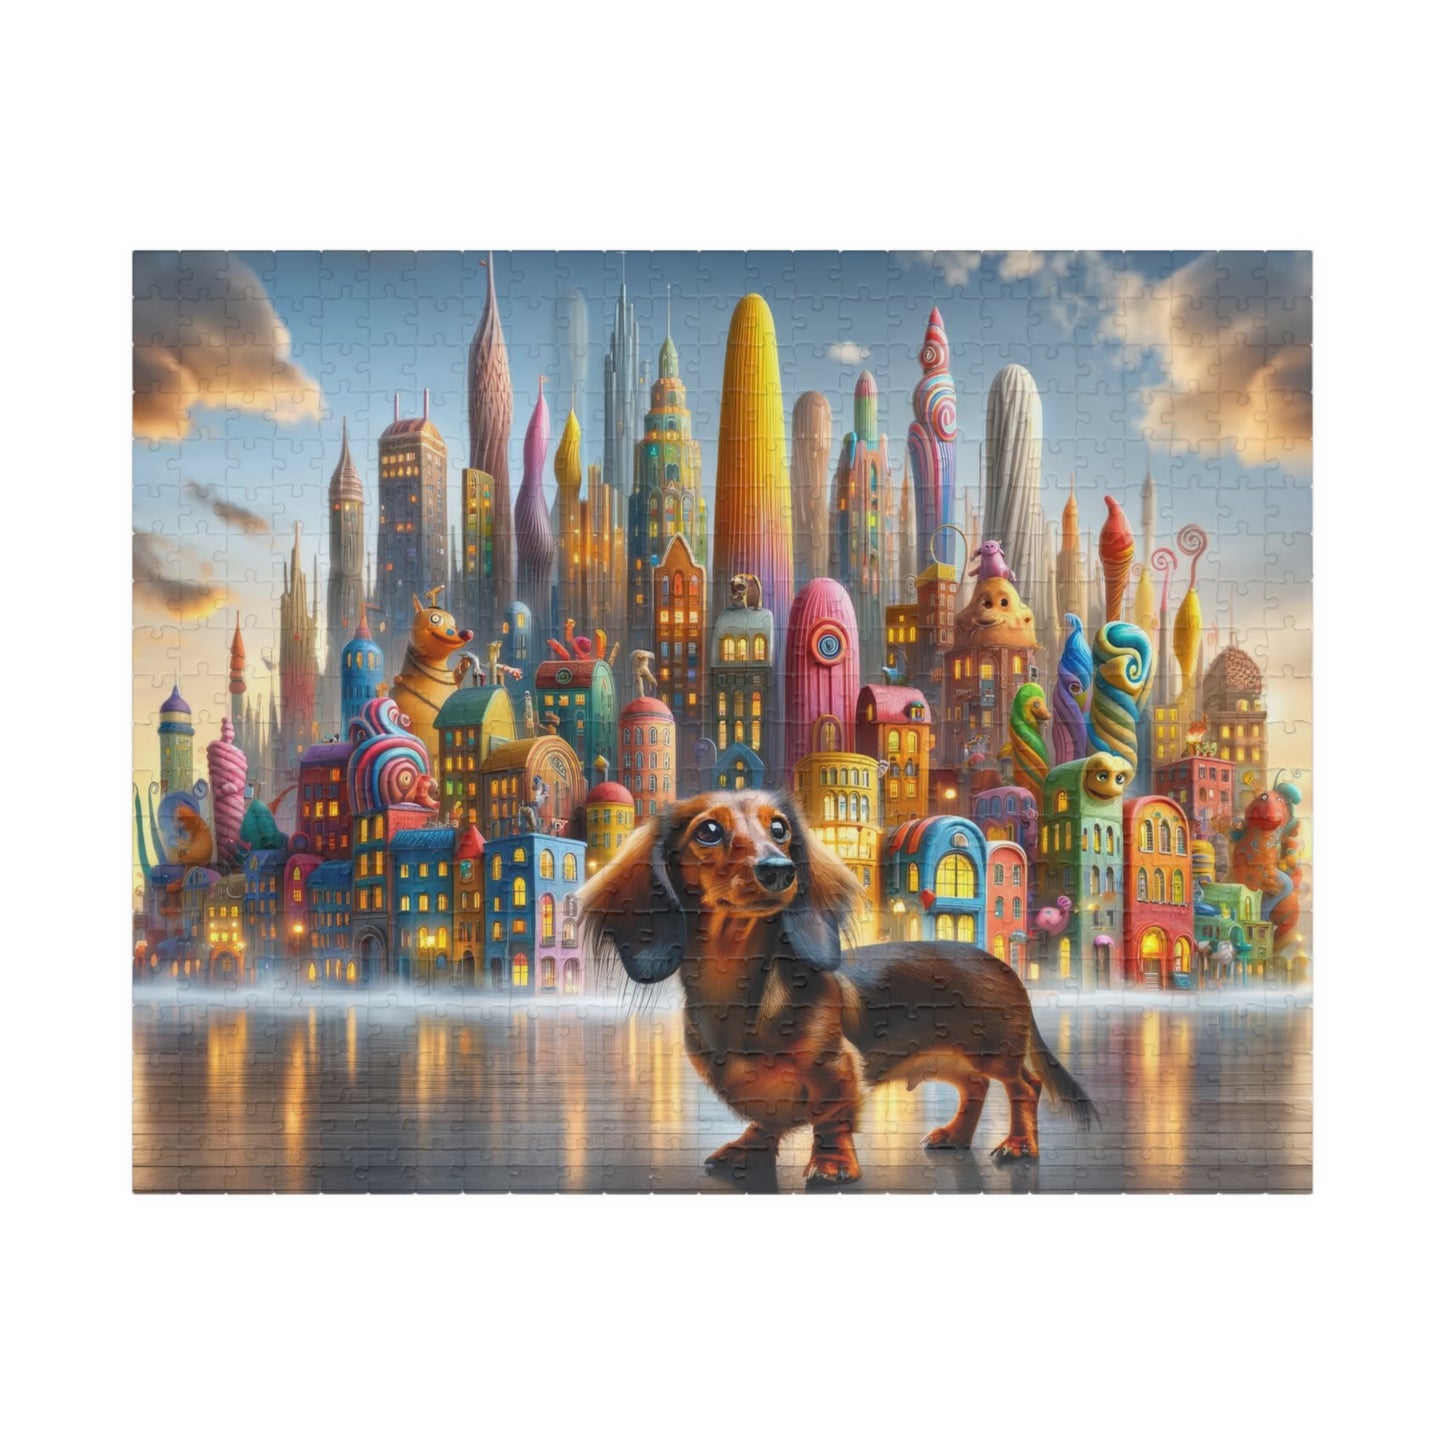 Dachshund Dream Cityscape Puzzle - Whimsical Skyline Jigsaw, Doxie Puzzle, Family-Friendly Game, Mindful Activity, 110, 252, 520, 1014-piece